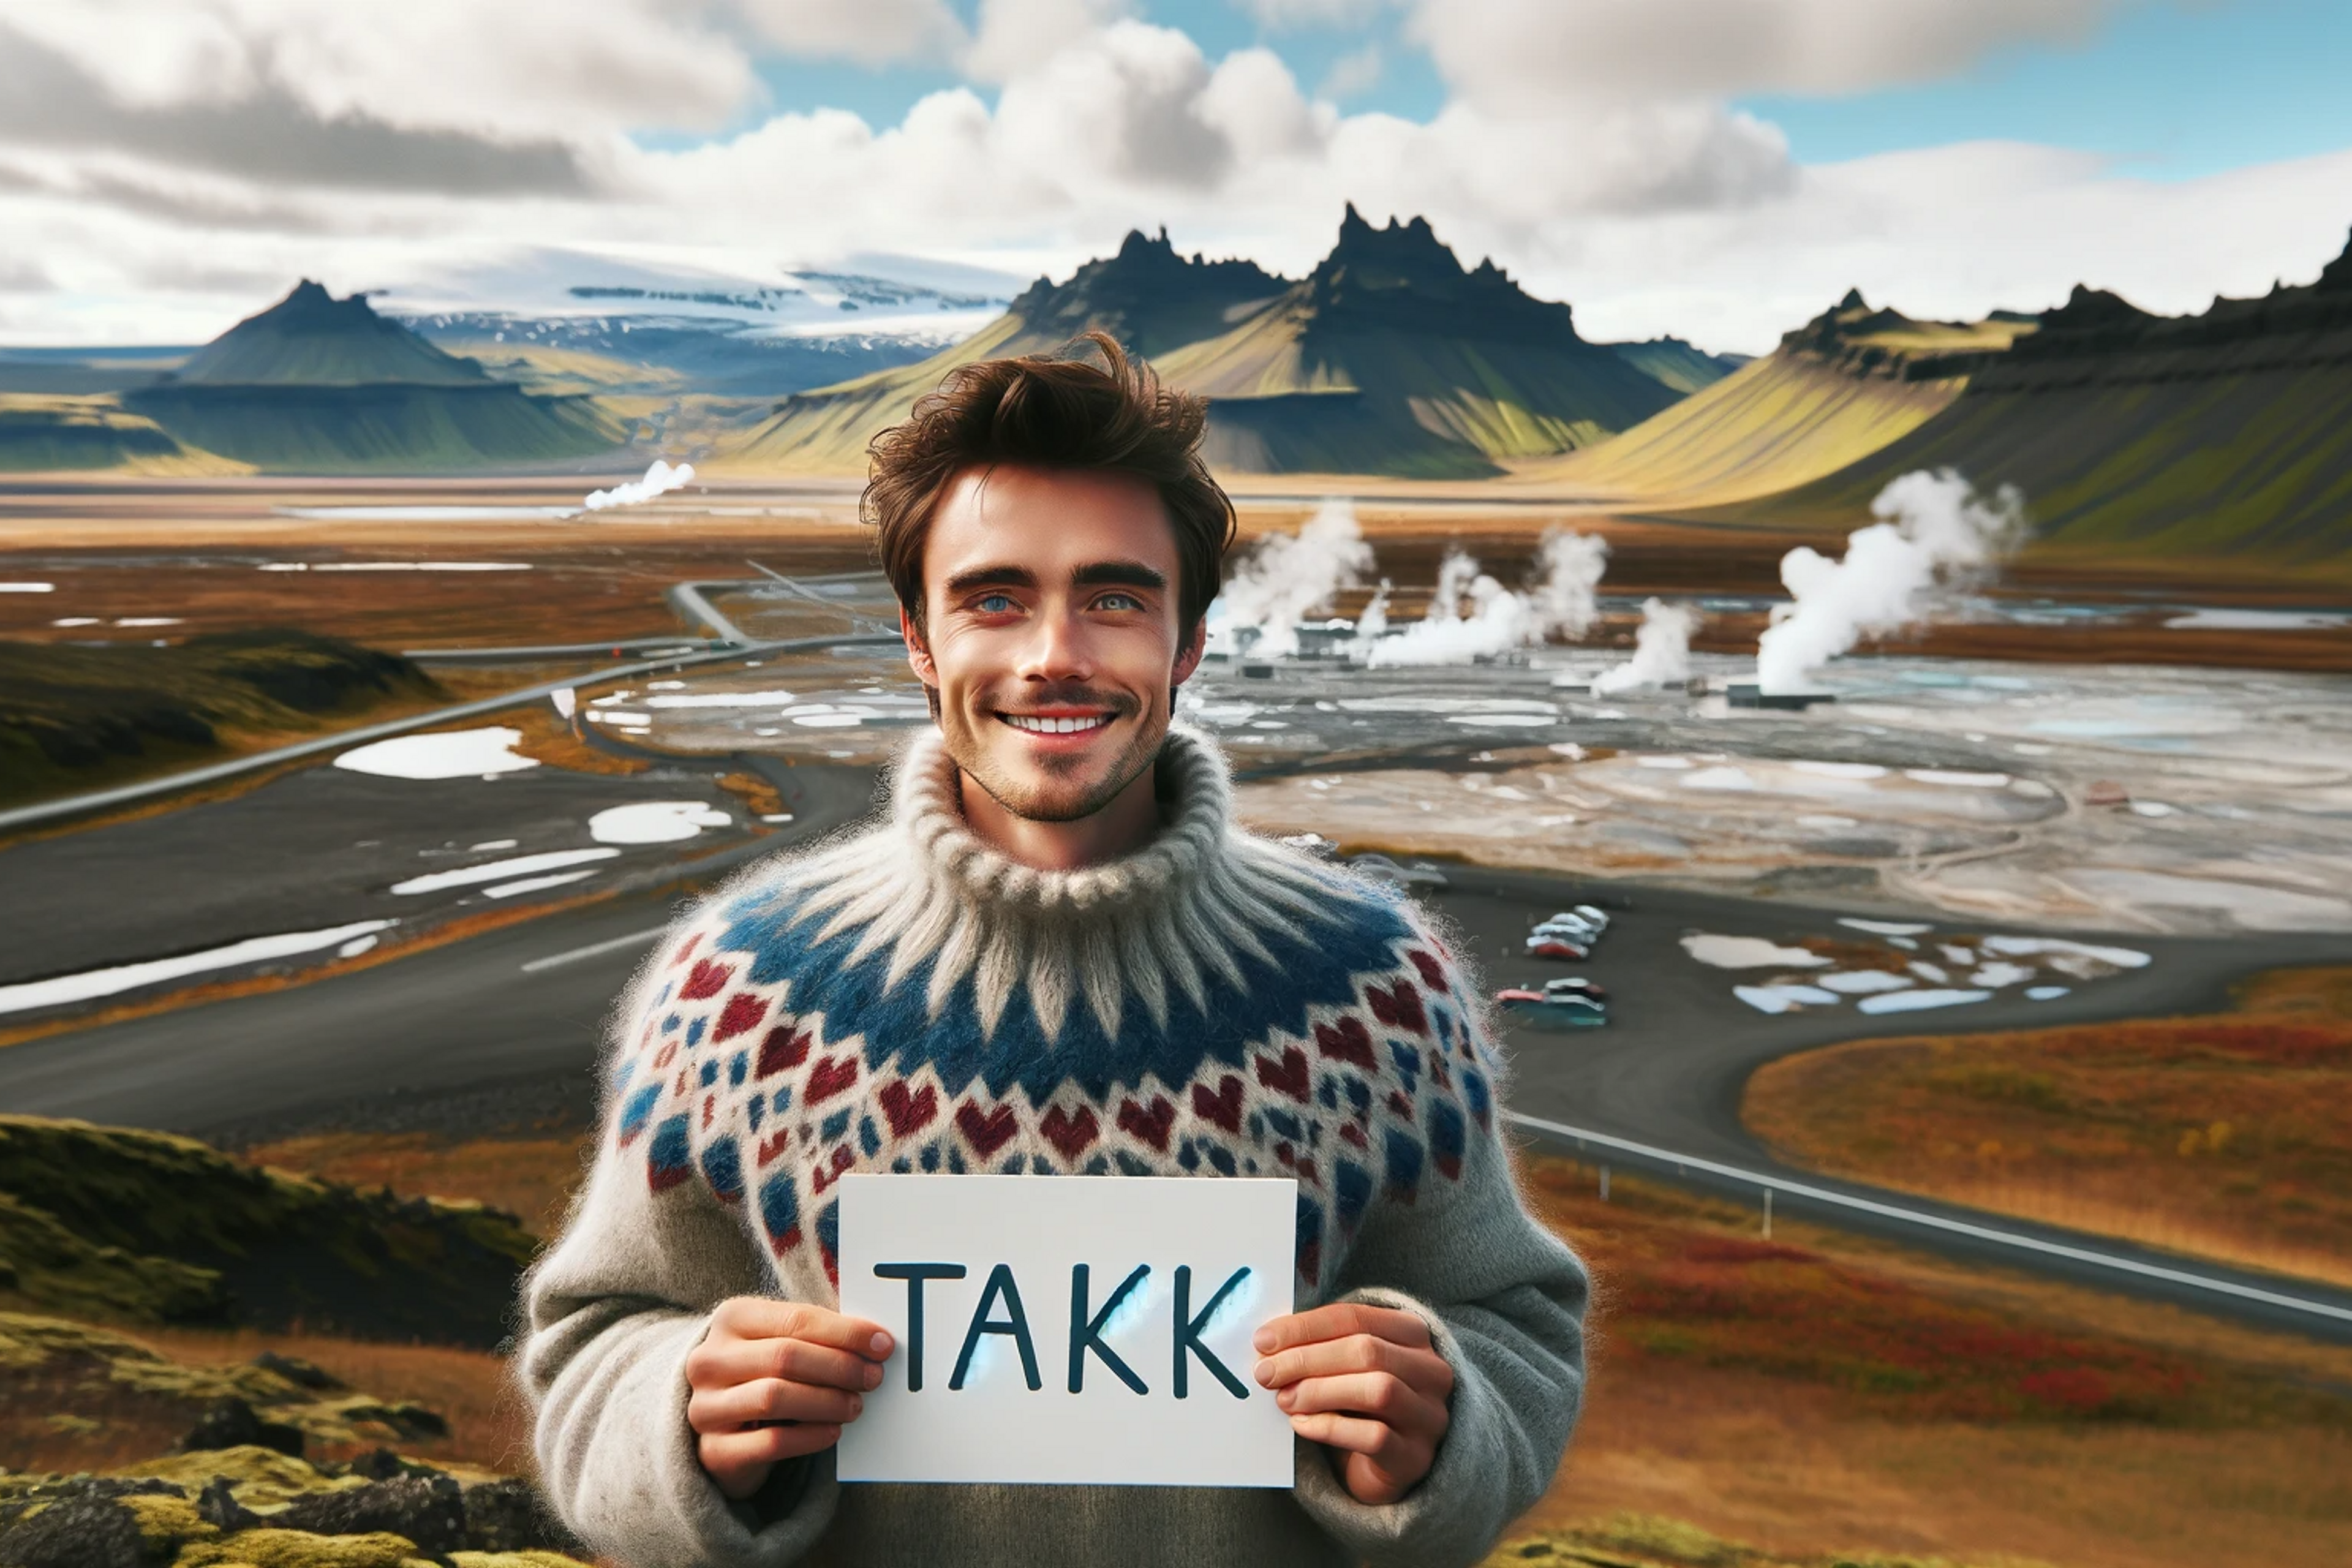 A person holding a sign in iceland that says "takk"